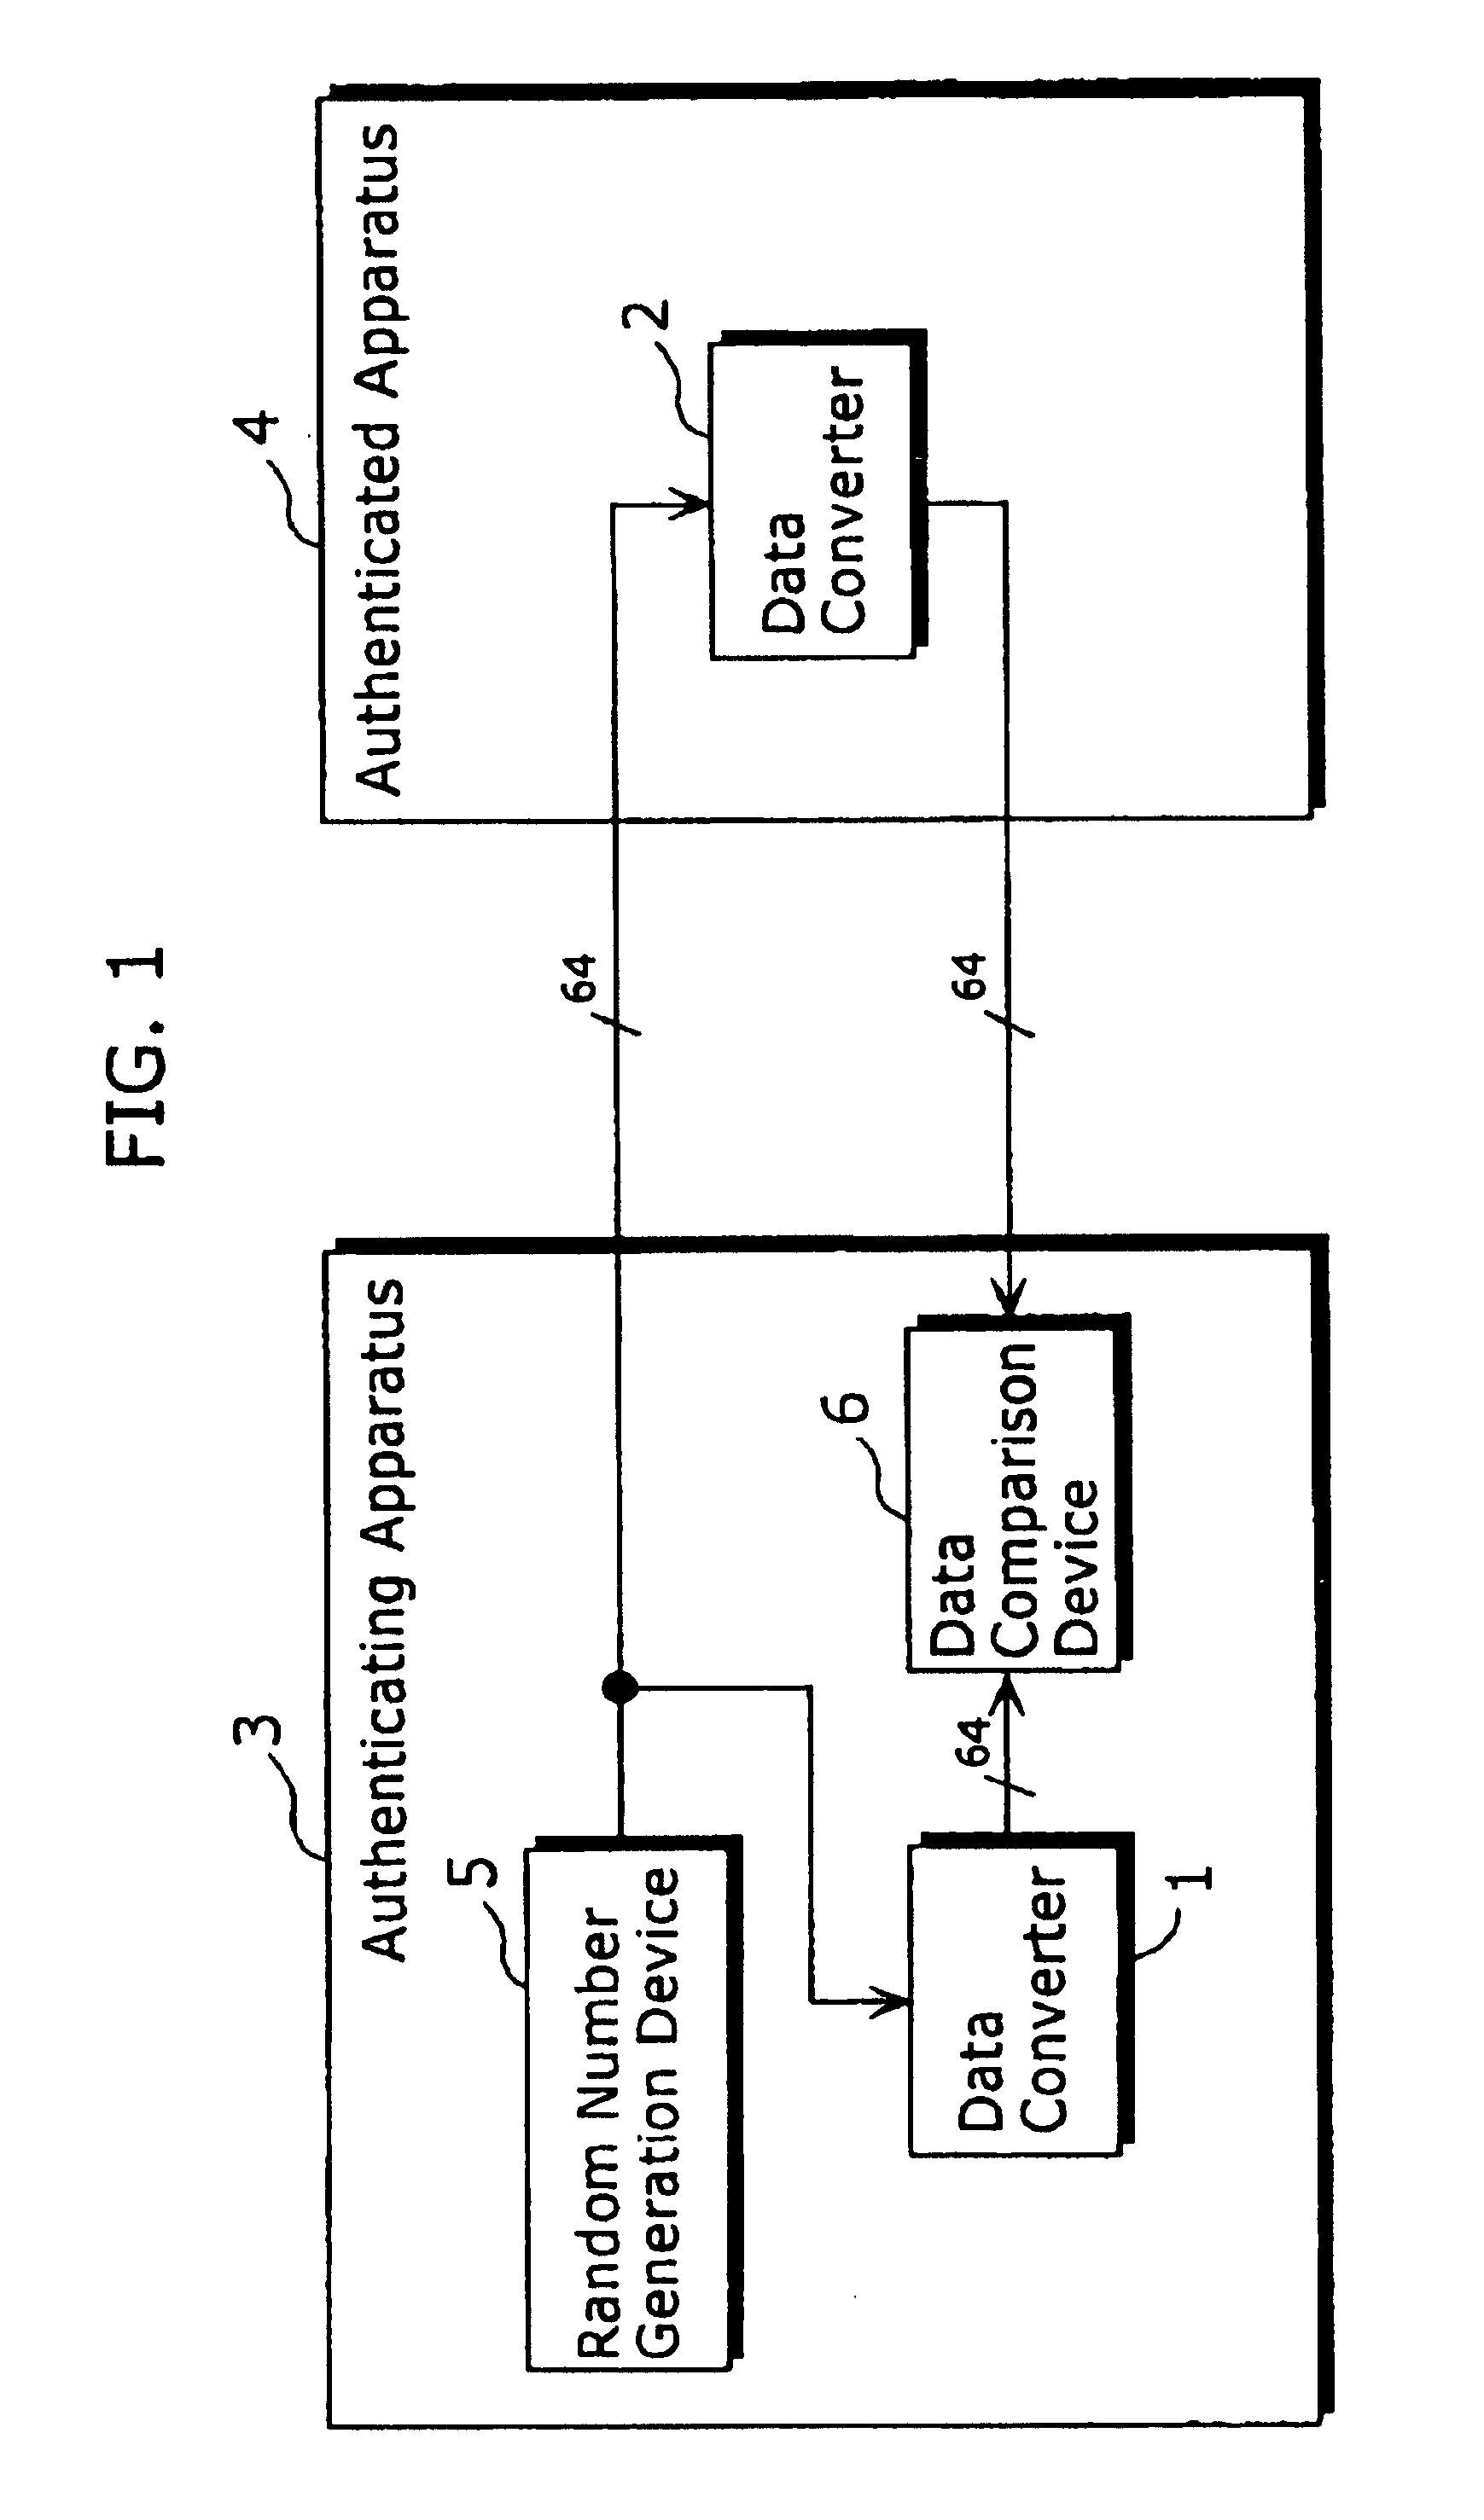 Data converter for performing exponentiation in polynomial residue class ring with value in finite field as coefficient